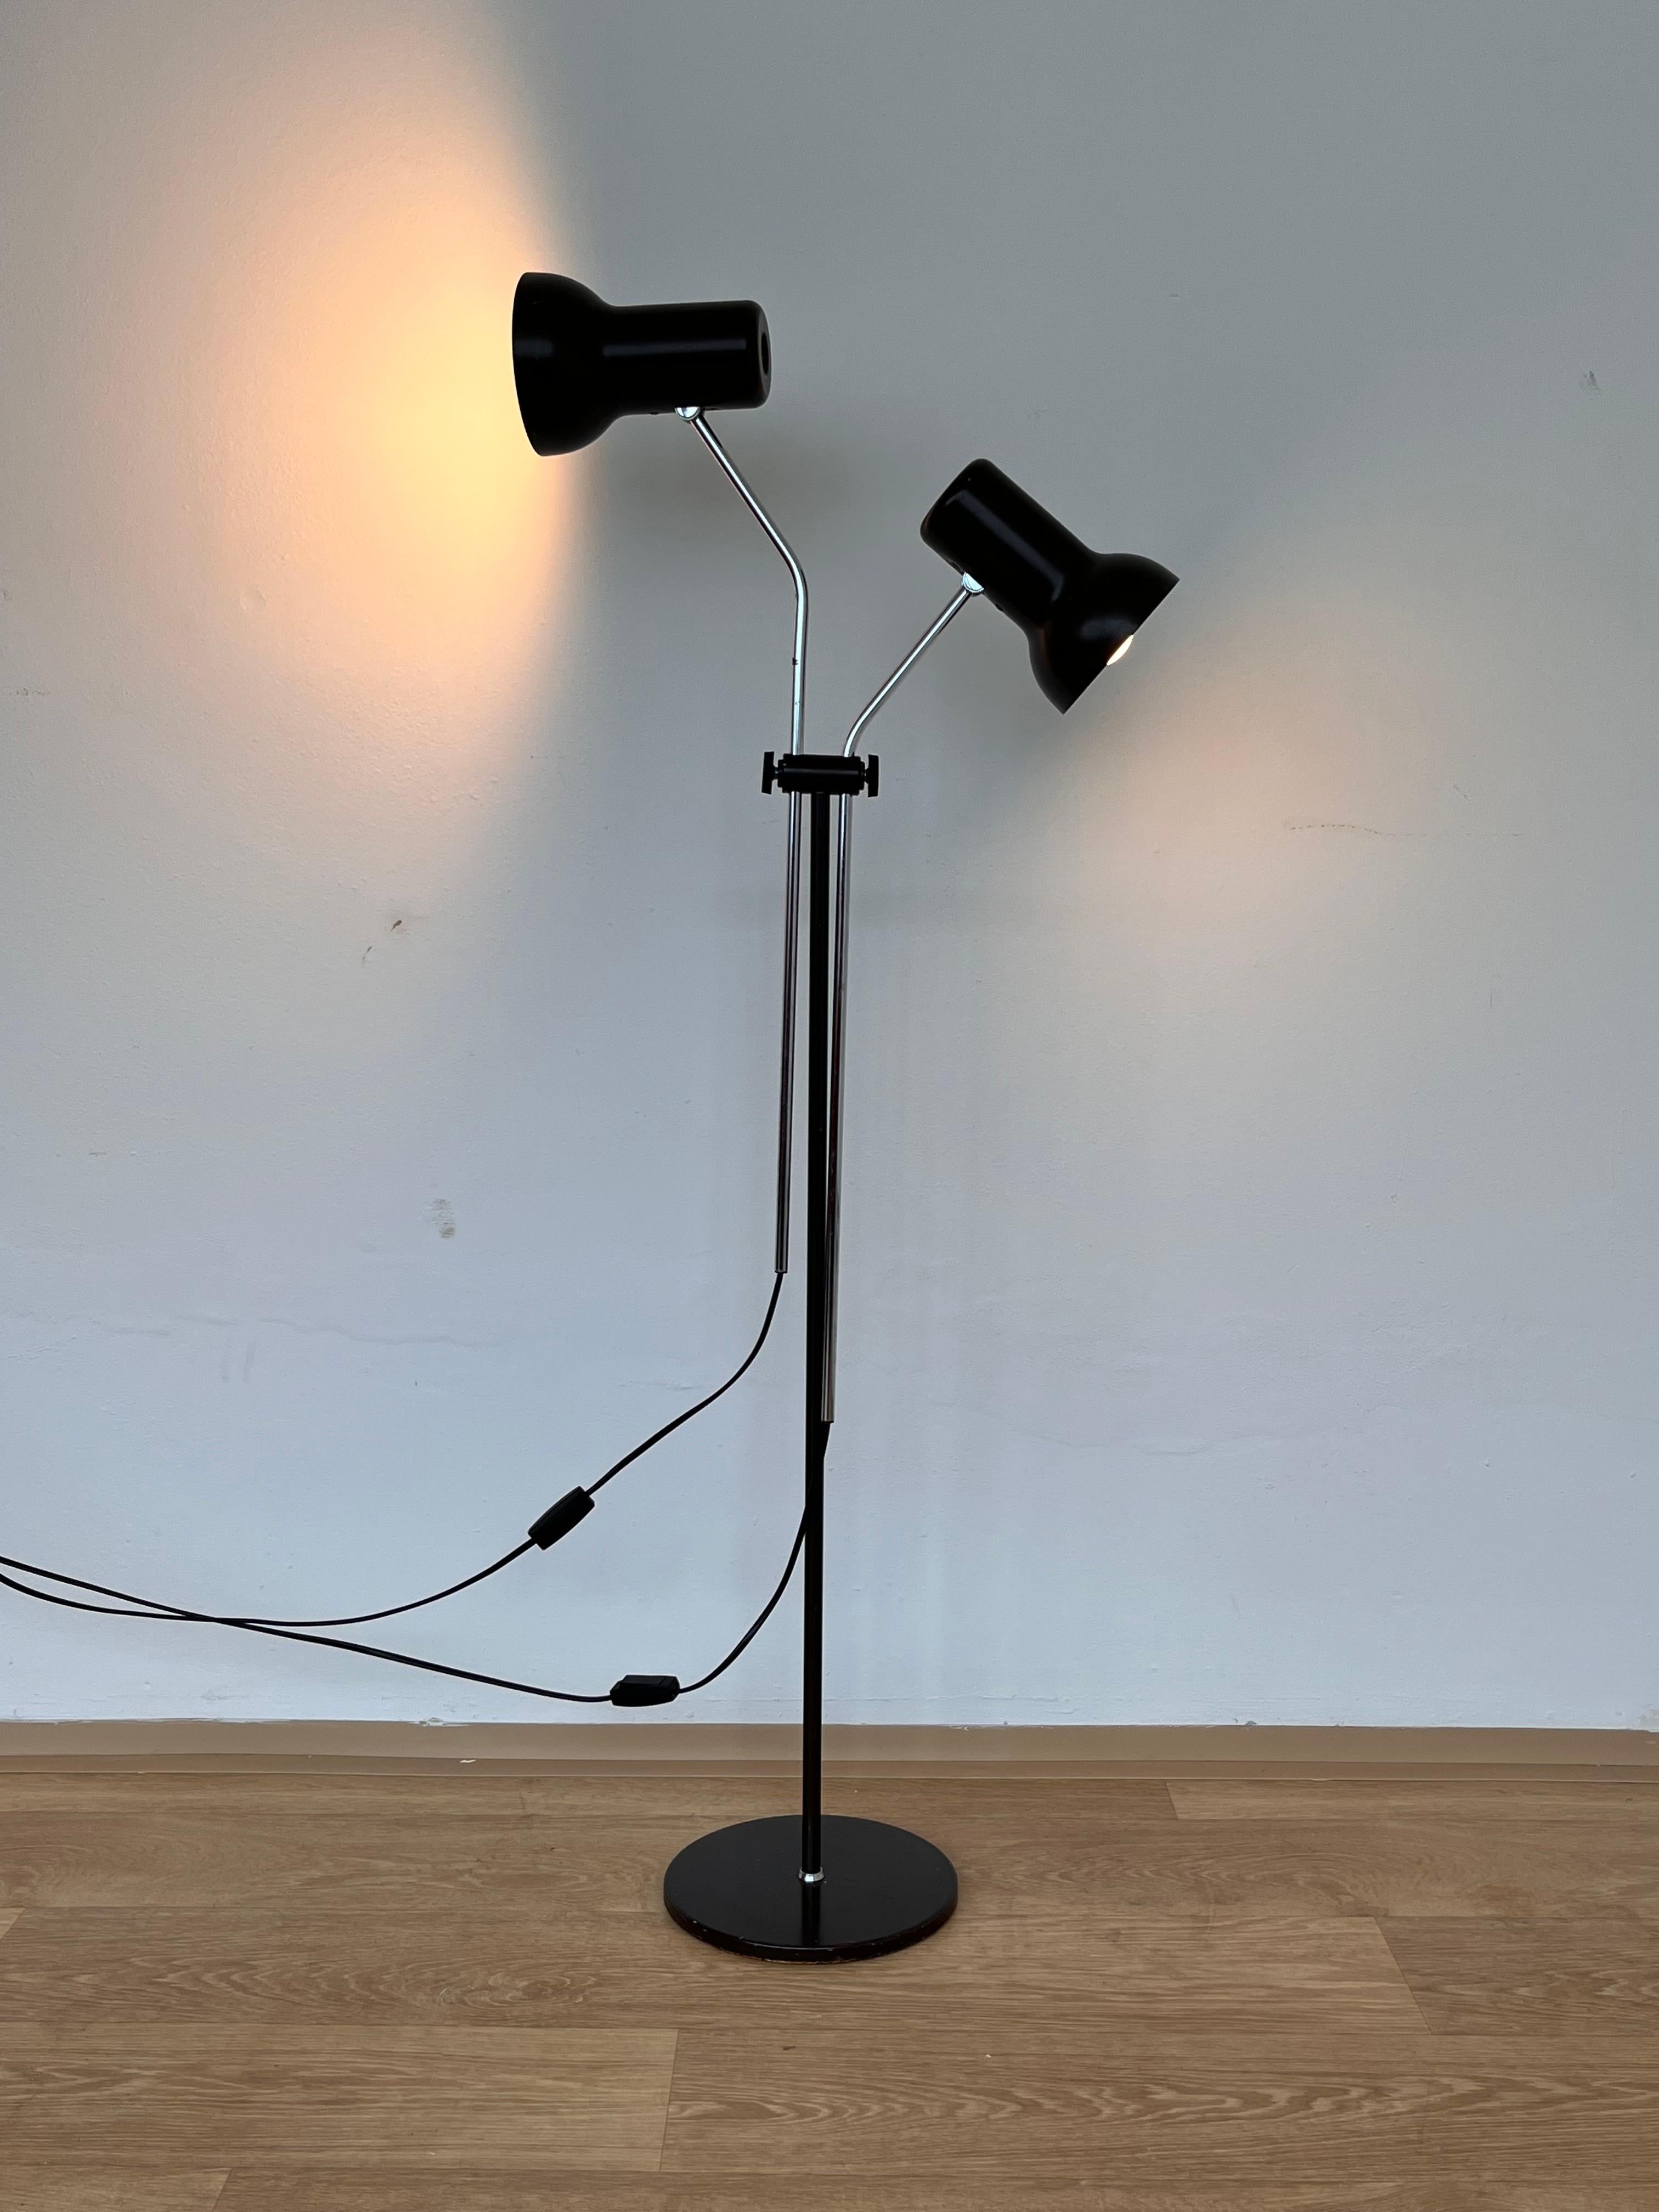 - height adjustable from about 109cm up to 151cm
- new electricity
- US adapter included
- two bulbs 
jr